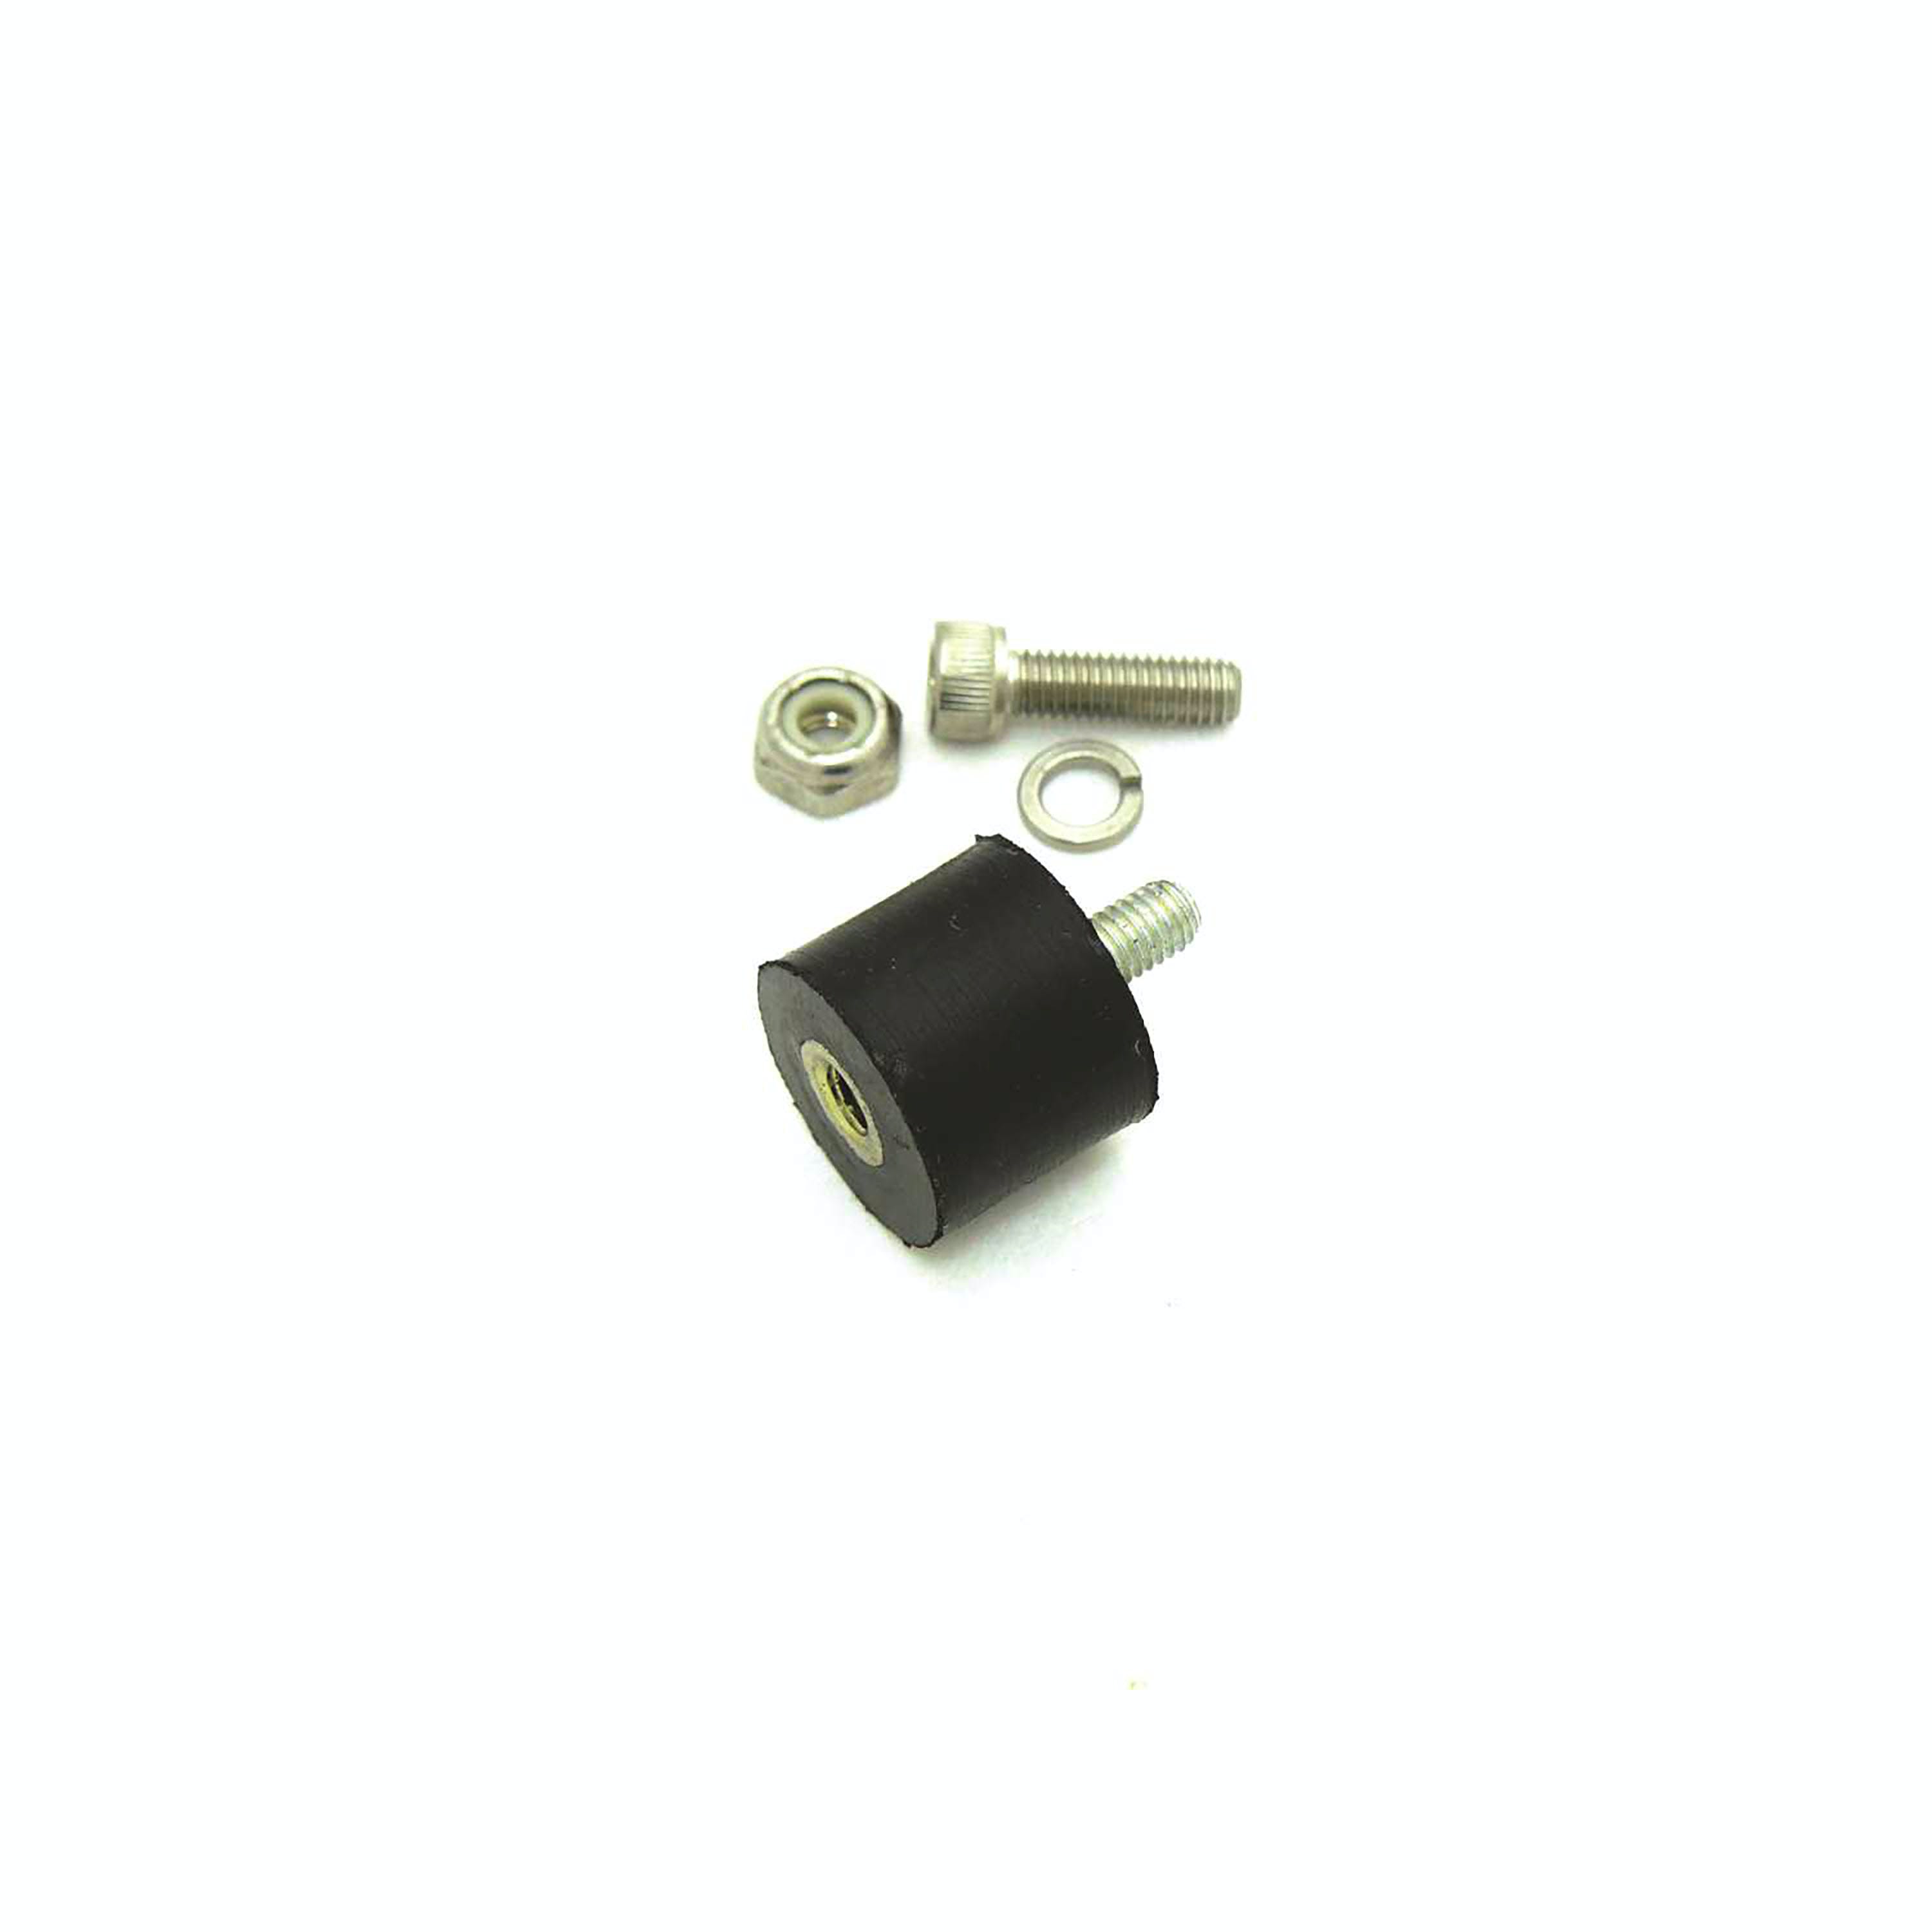 FAST - Fuel Air Spark Technology 1000-1032 Replacement shock mounts for installing an E6 ignition box